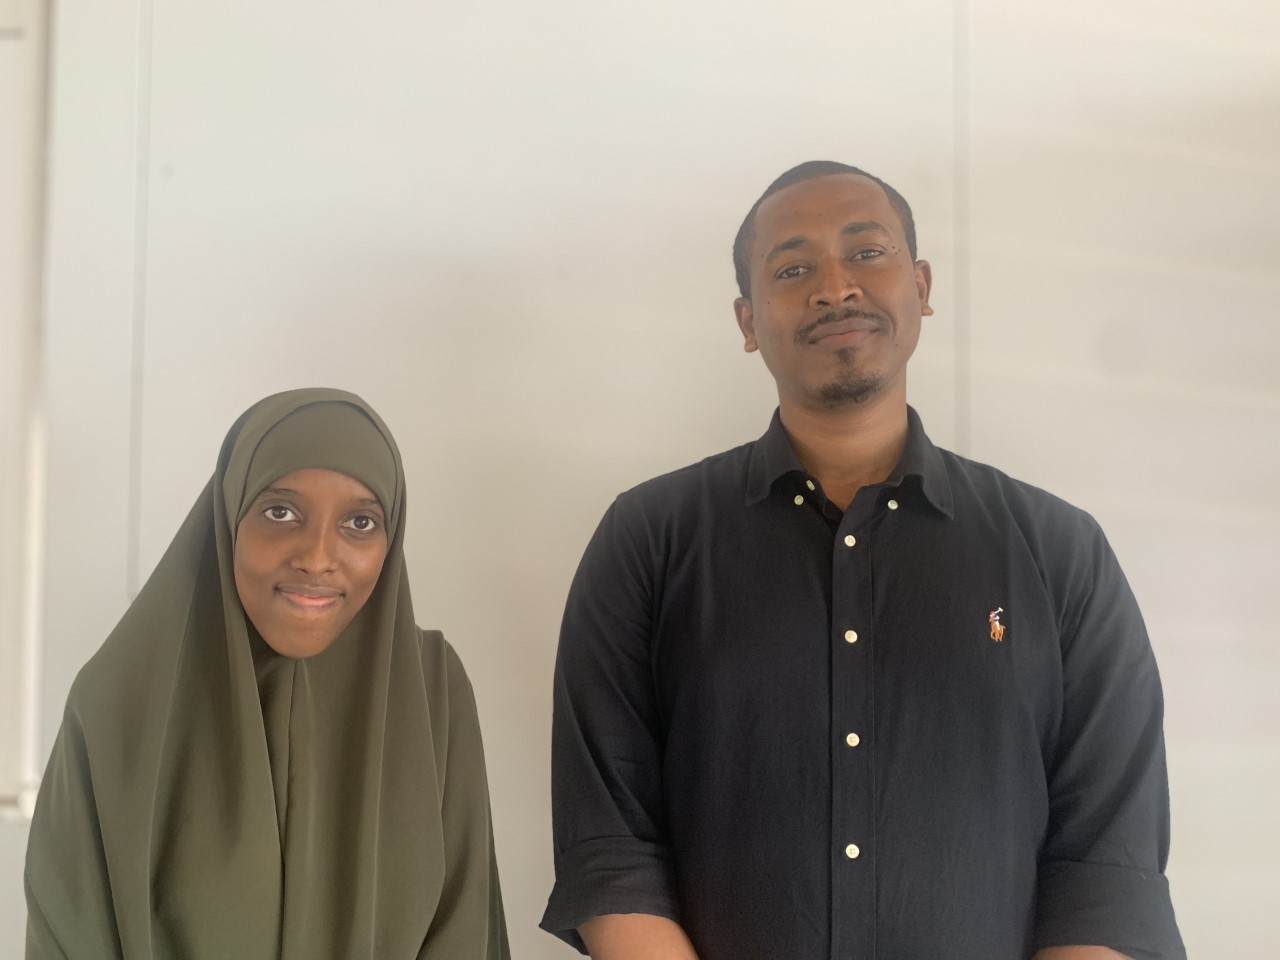 Mohammed Osman and his colleague Munira Omar were selected to develop a job matching platform and training portal for Somali young people. Photo: UNDP Somalia